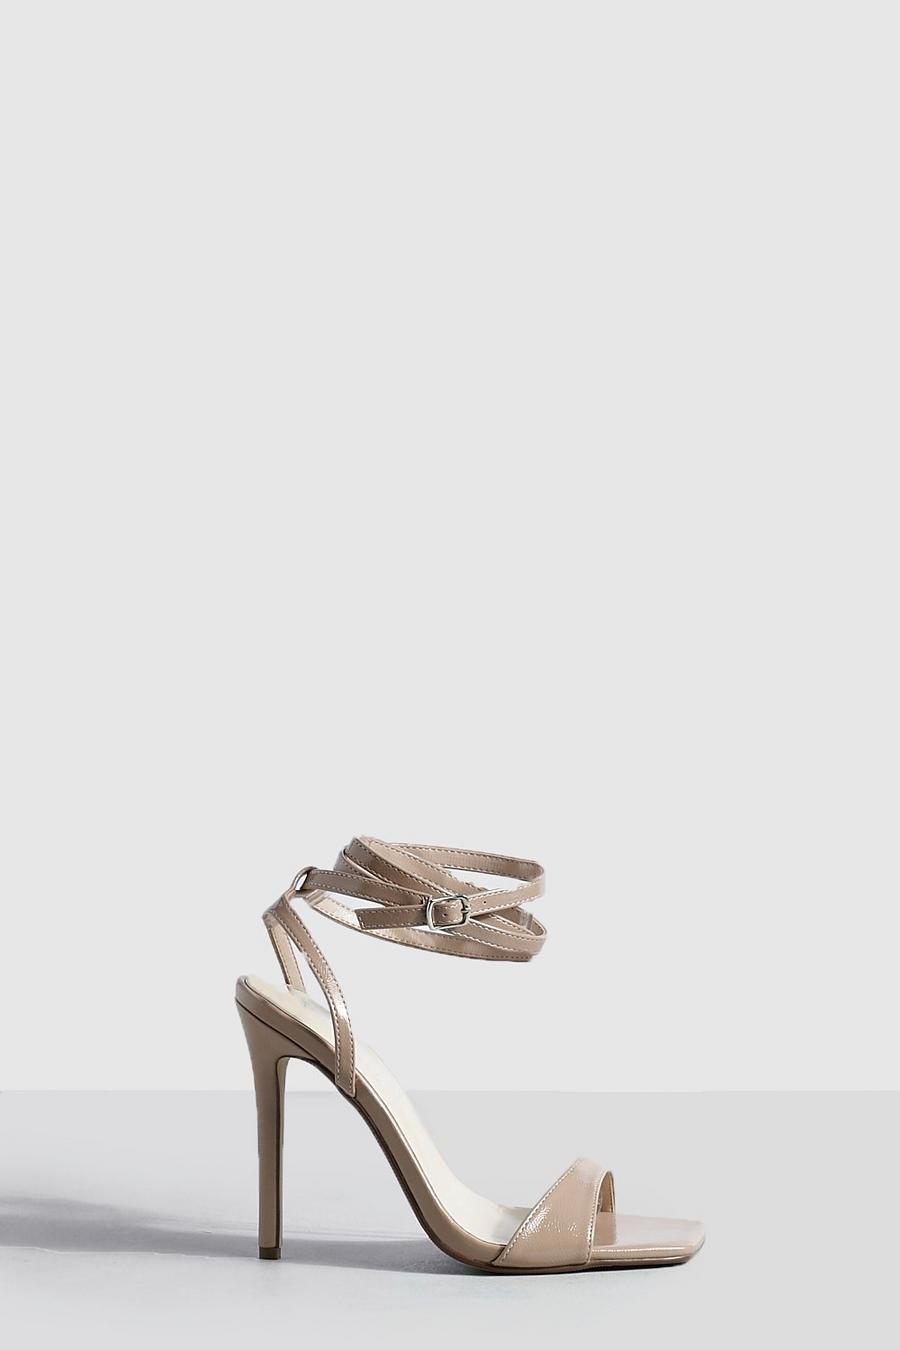 Taupe beis Wide Fit Strappy Ankle Barely There Stiletto Heel         